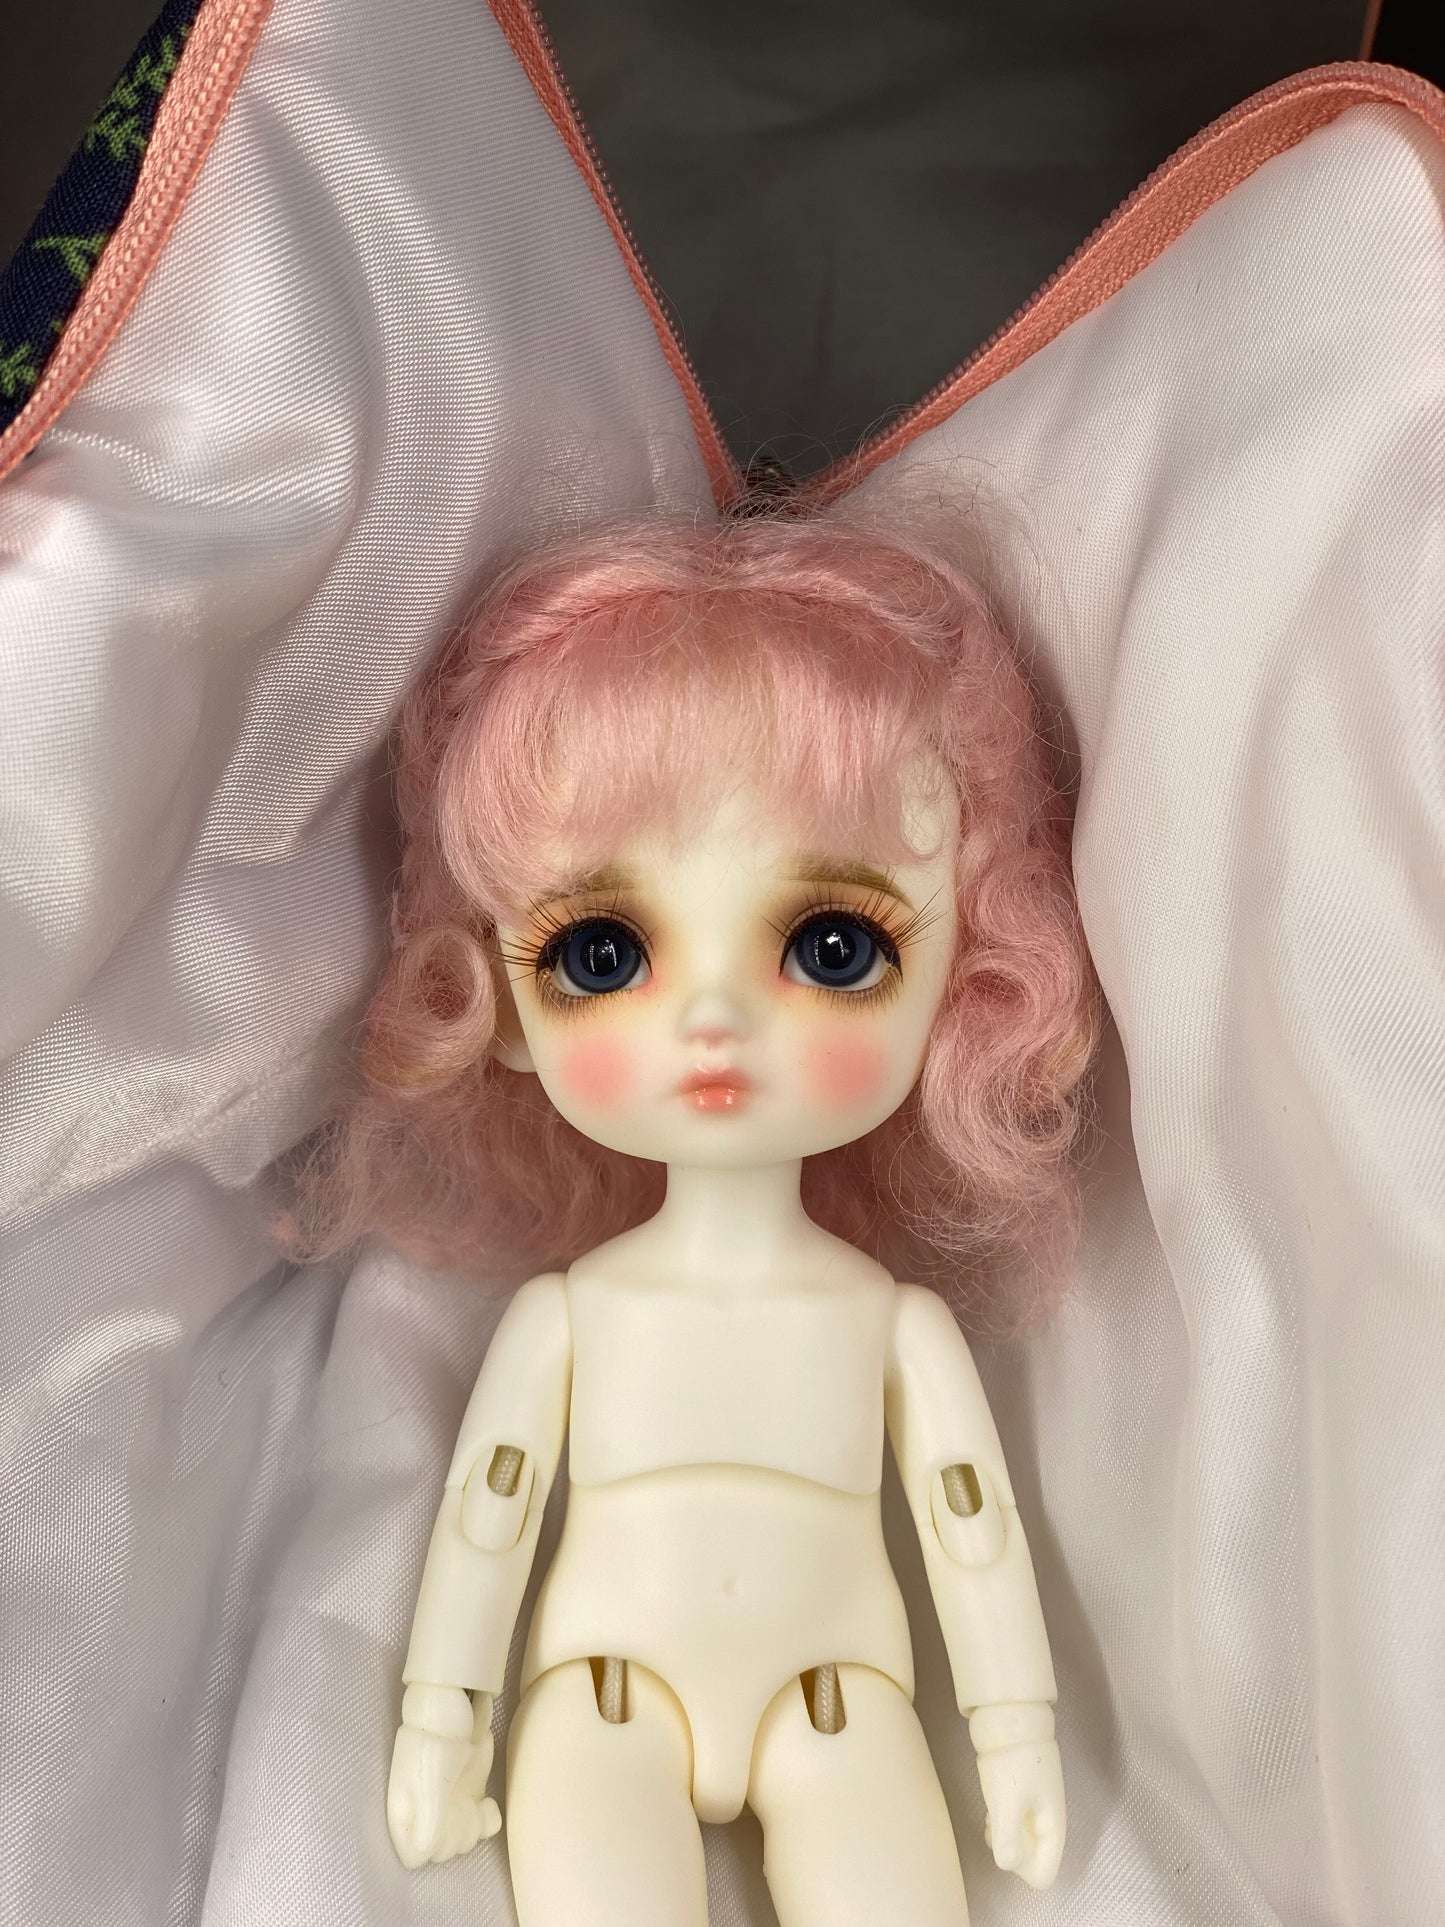 Nine 9 Style Petit BJD Doll Nine 16 Ball Jointed Bjd Doll SHDP exclusive 1/8 baby doll